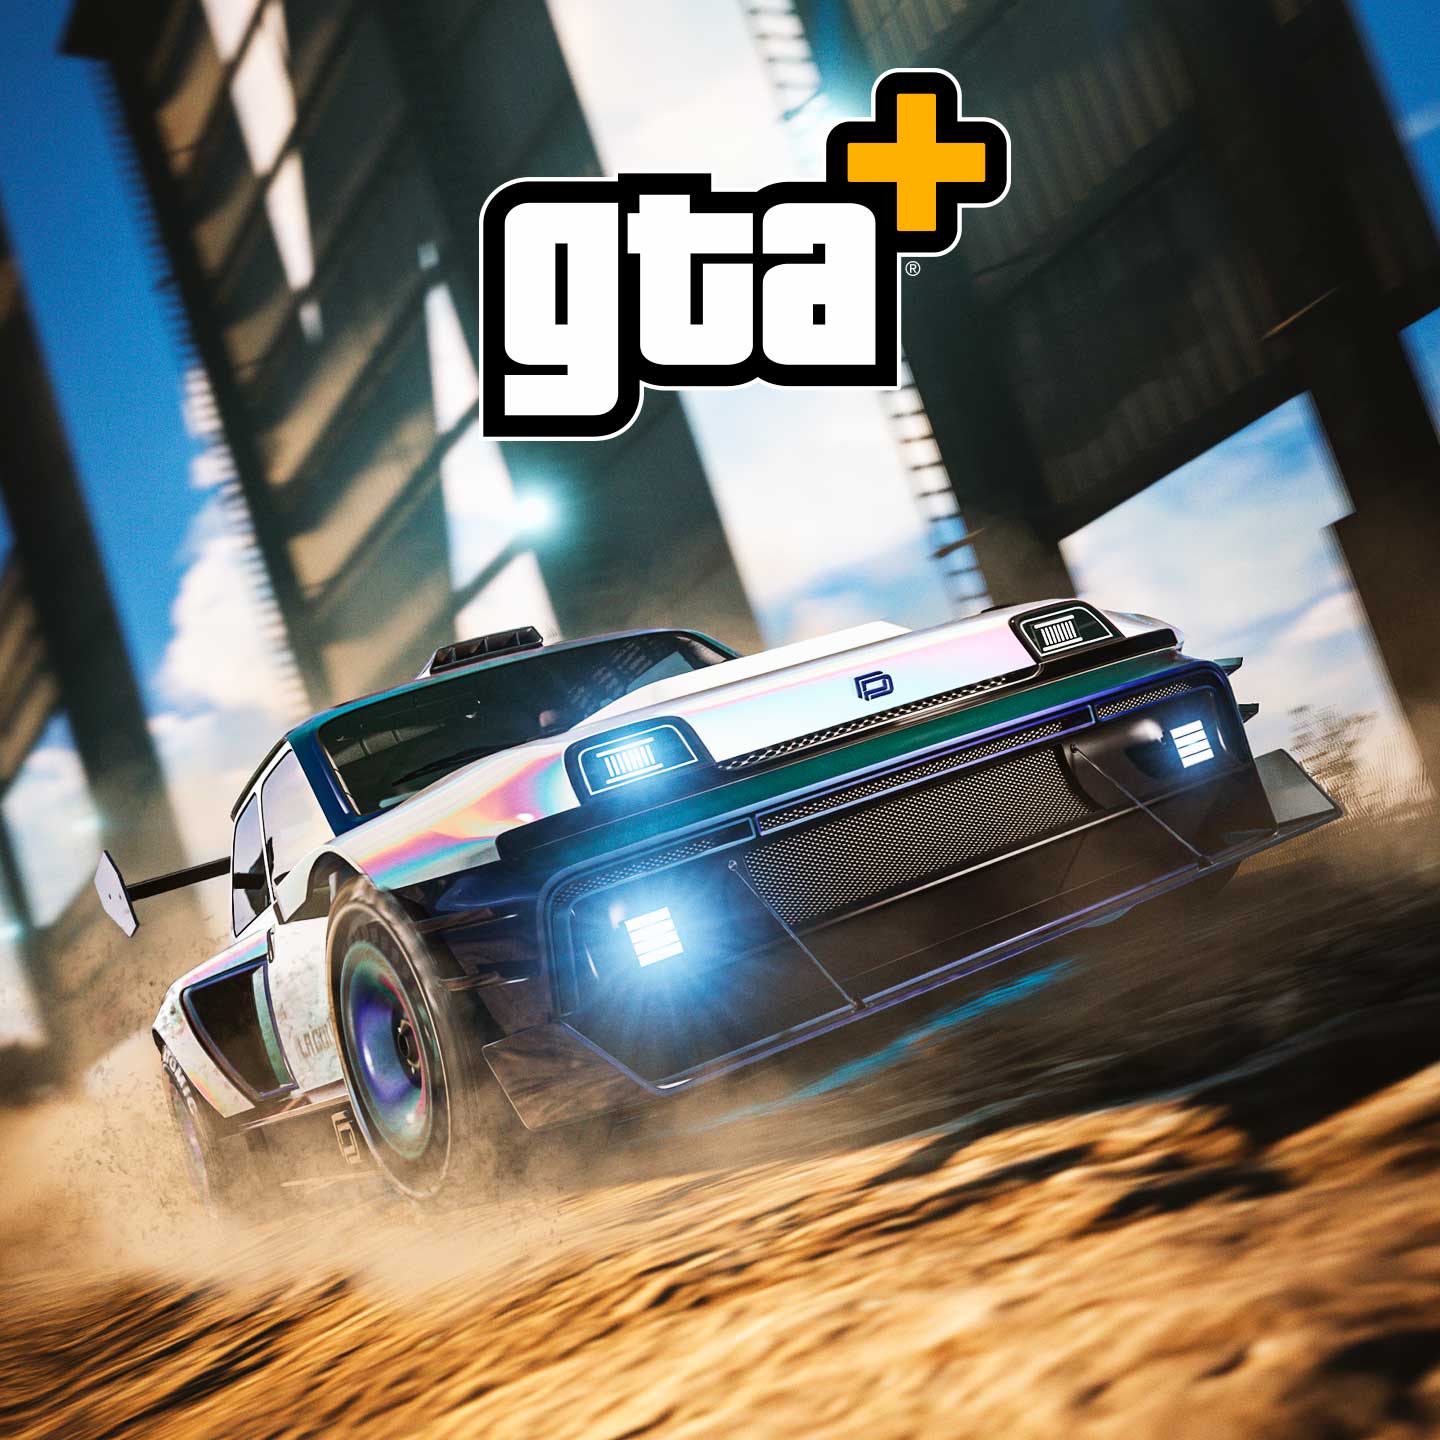 Get the New Penaud La Coureuse Sports Car, a Free Auto Shop Car Lift, and  Much More with GTA+ - Rockstar Games